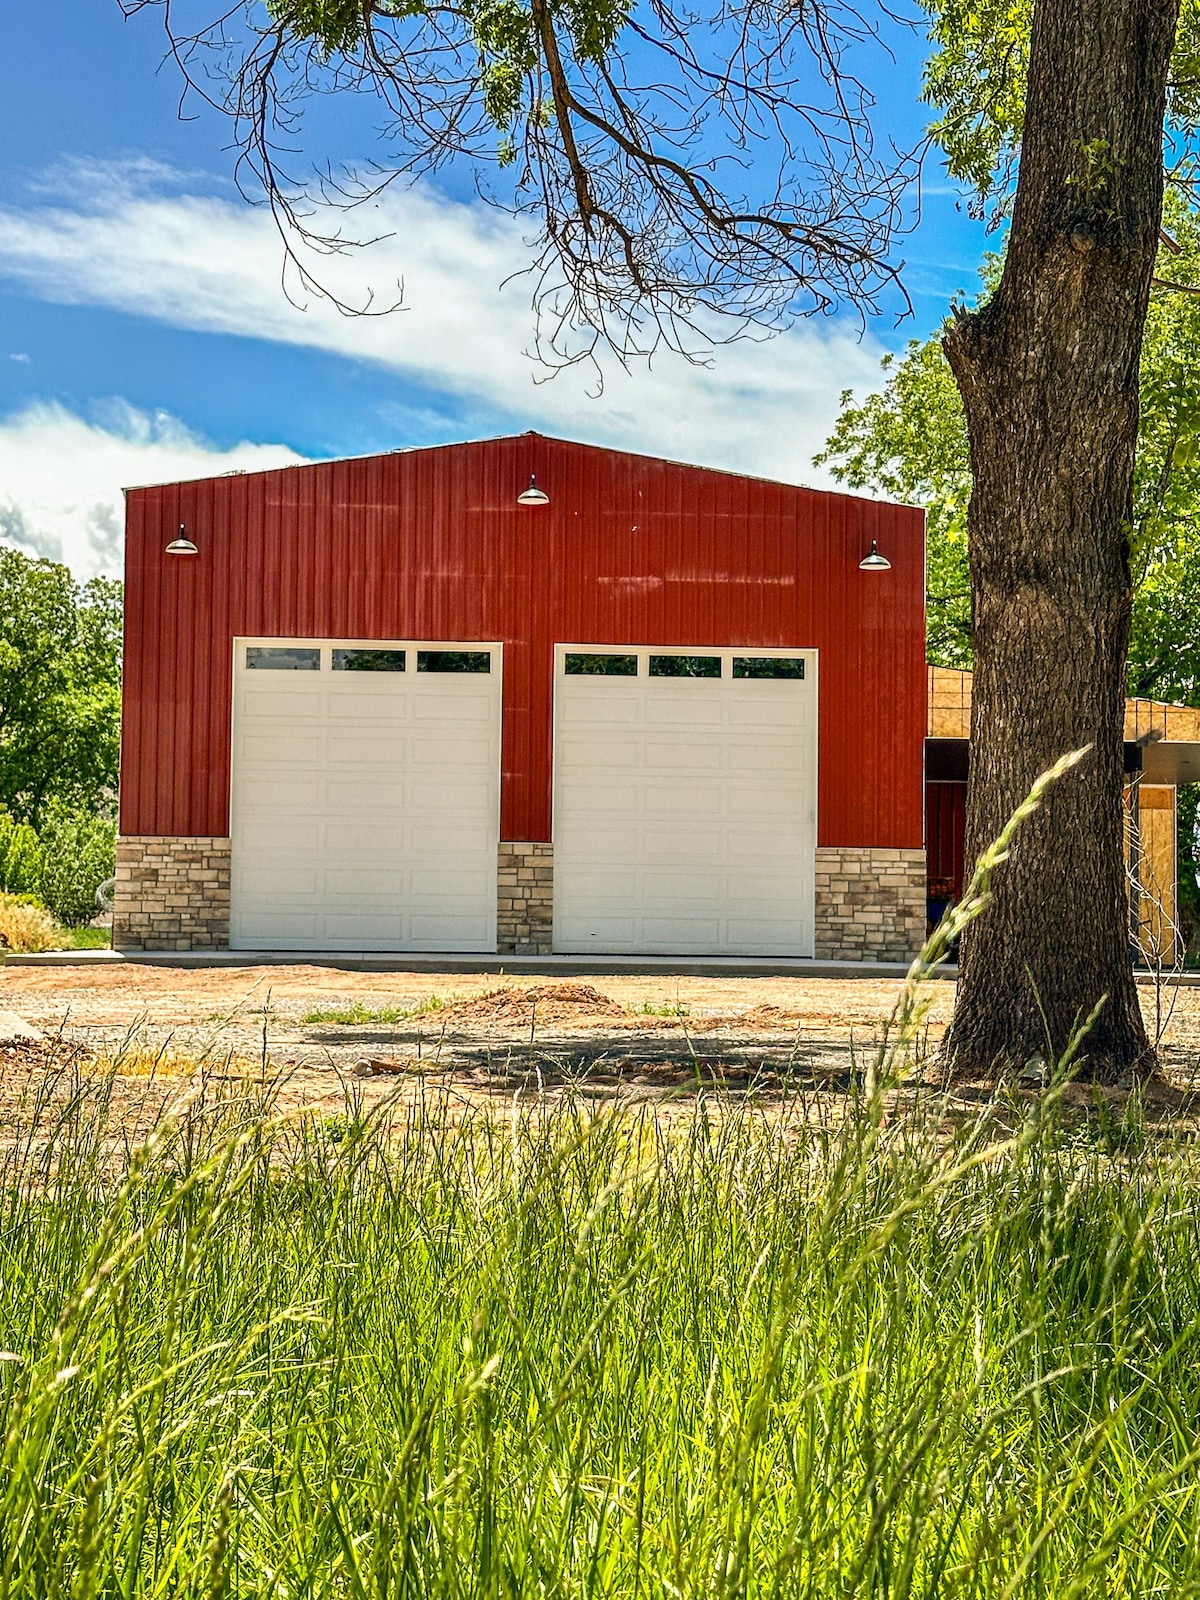 Country Living “The Red Haven” New Barn near Zion